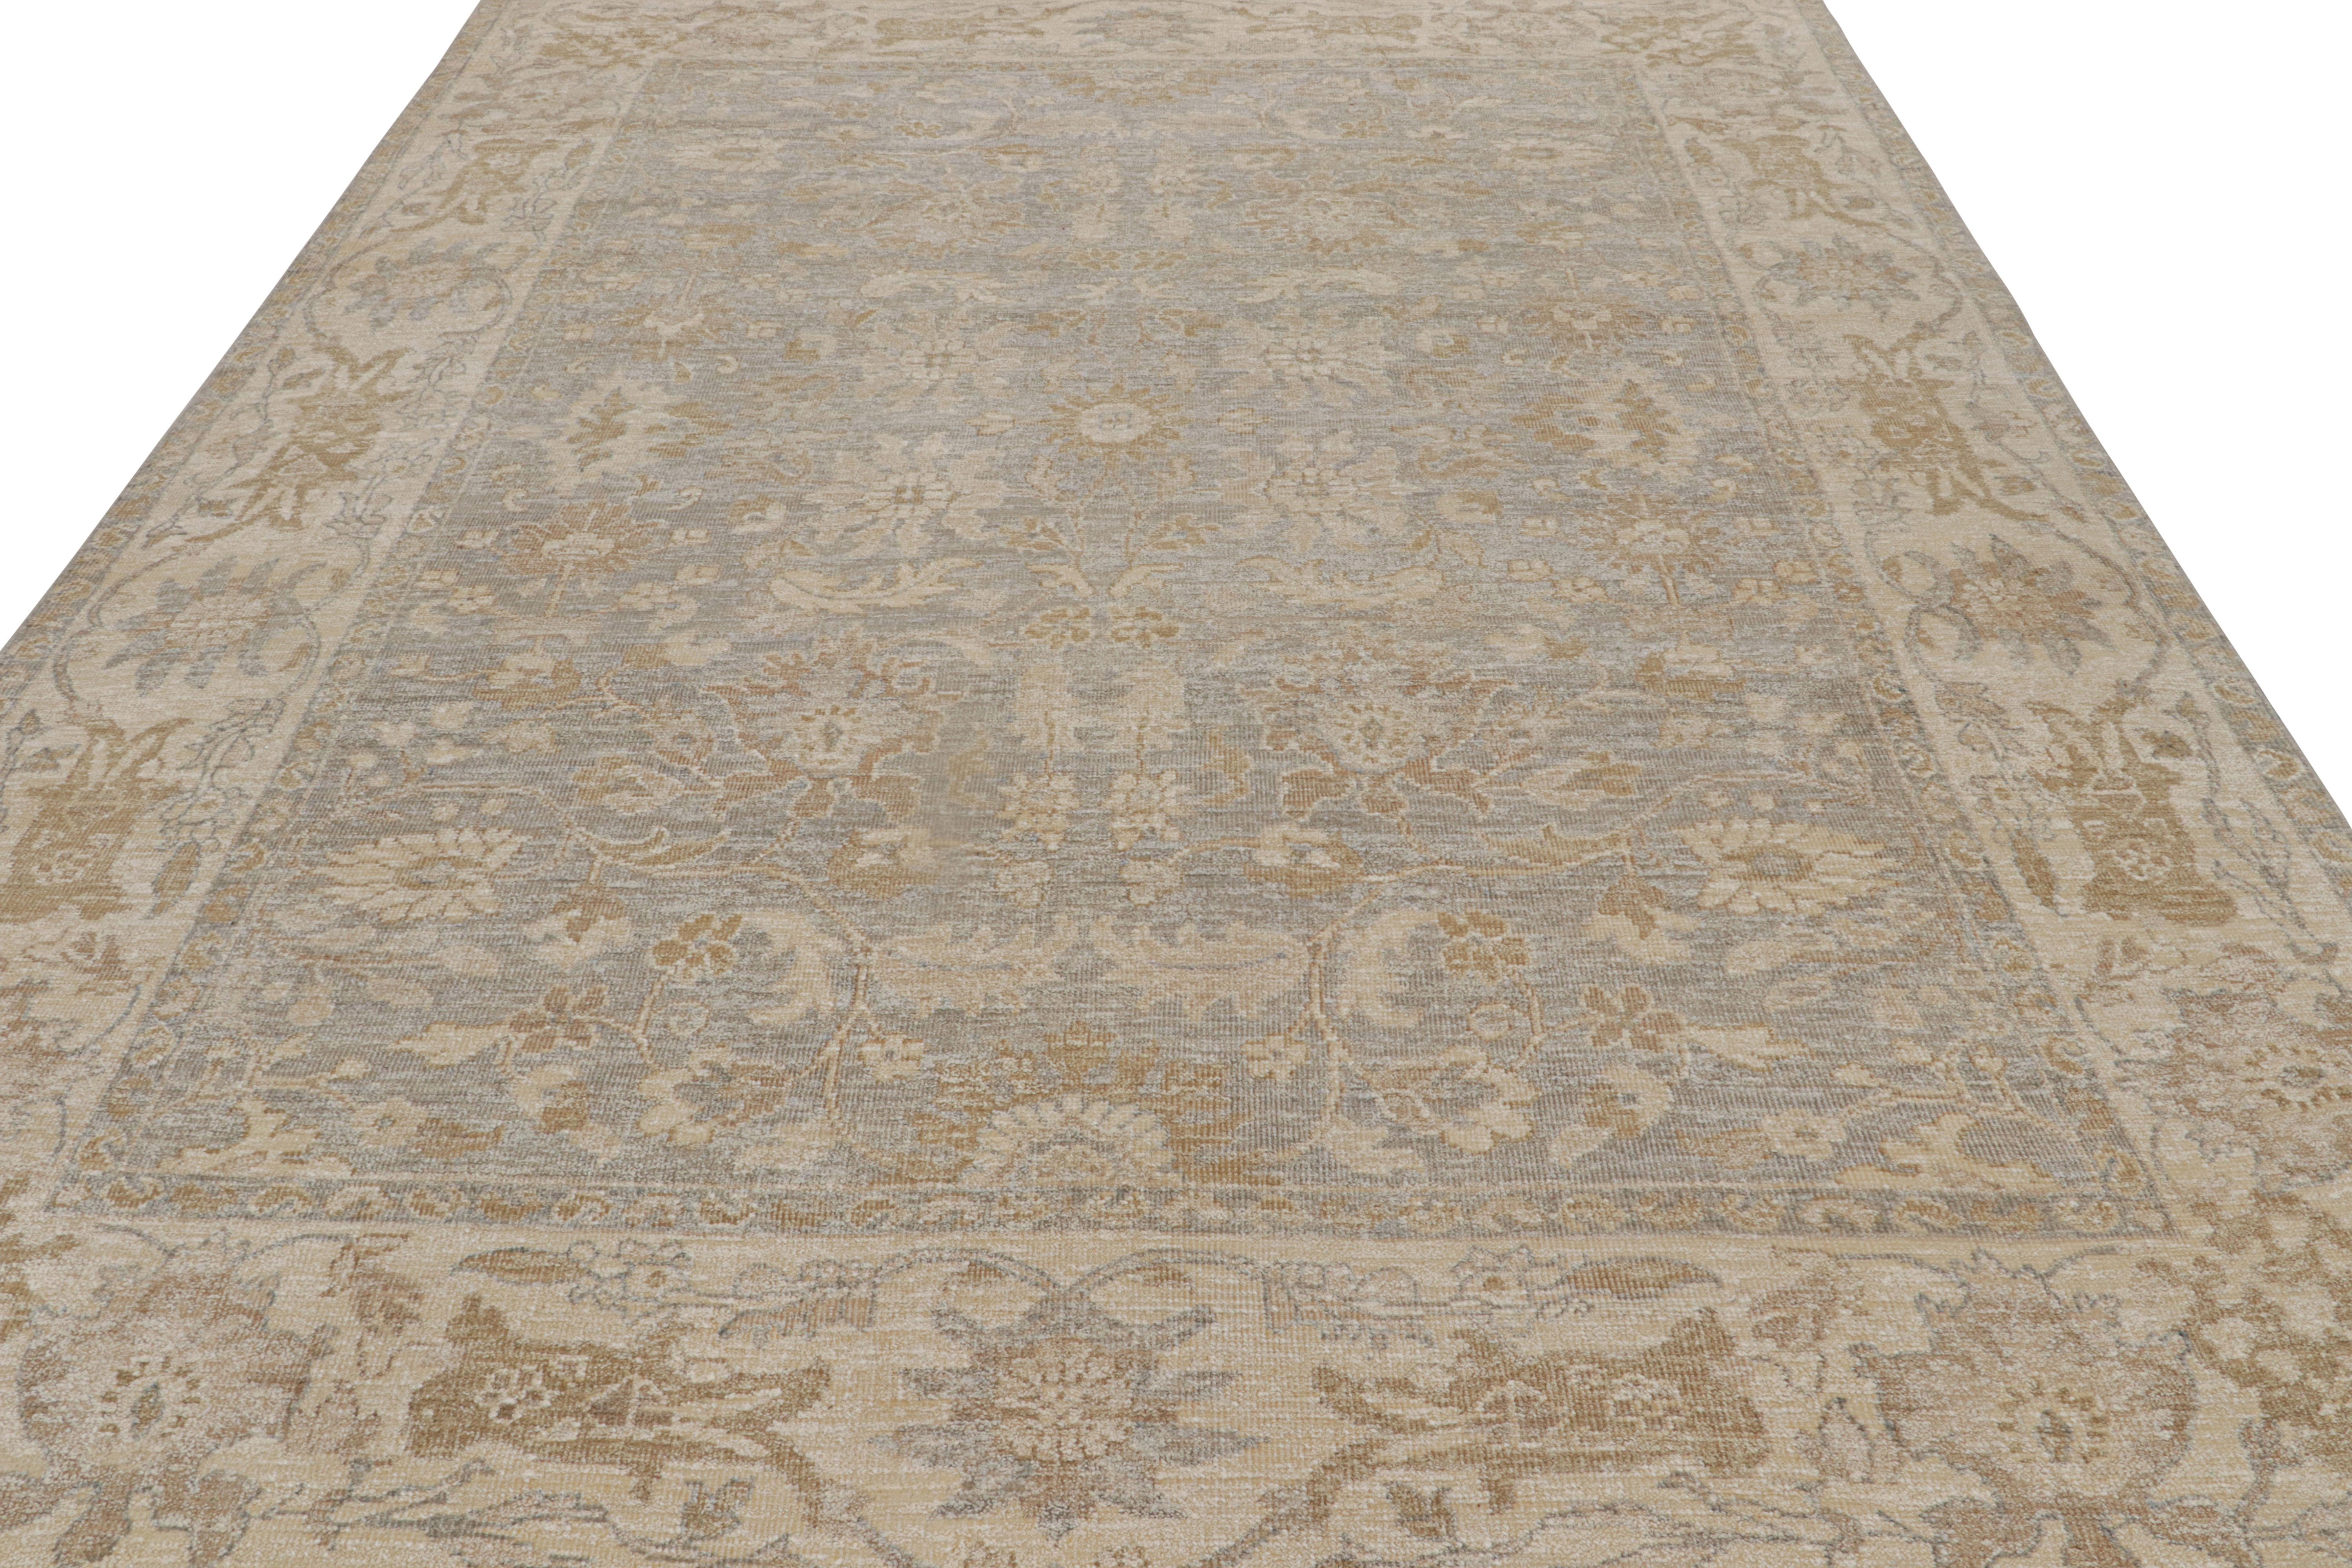 Modern Rug & Kilim’s Oushak Style Rug In Beige/Brown With All Over Floral Patterns For Sale